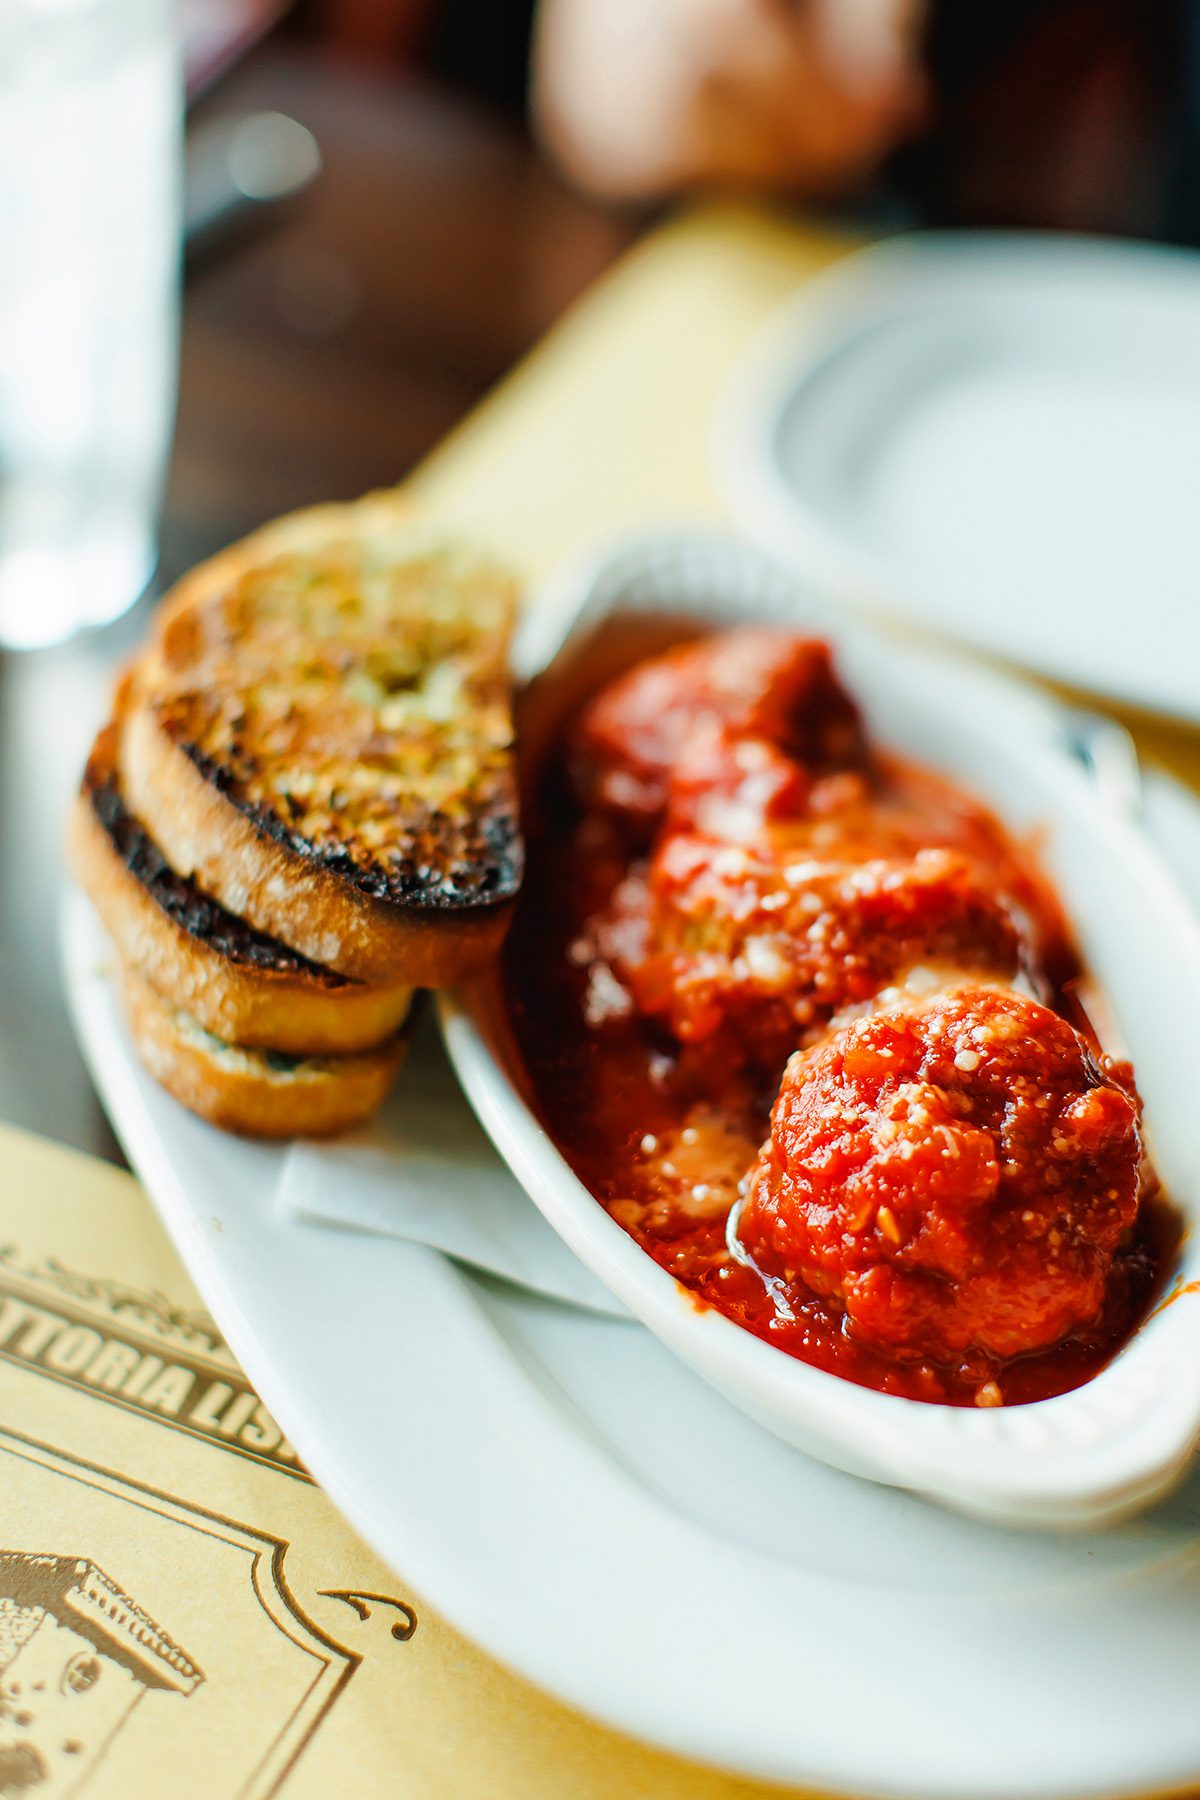 Trattoria Lisina meatballs at the Duchman Family Winery in Driftwood Texas